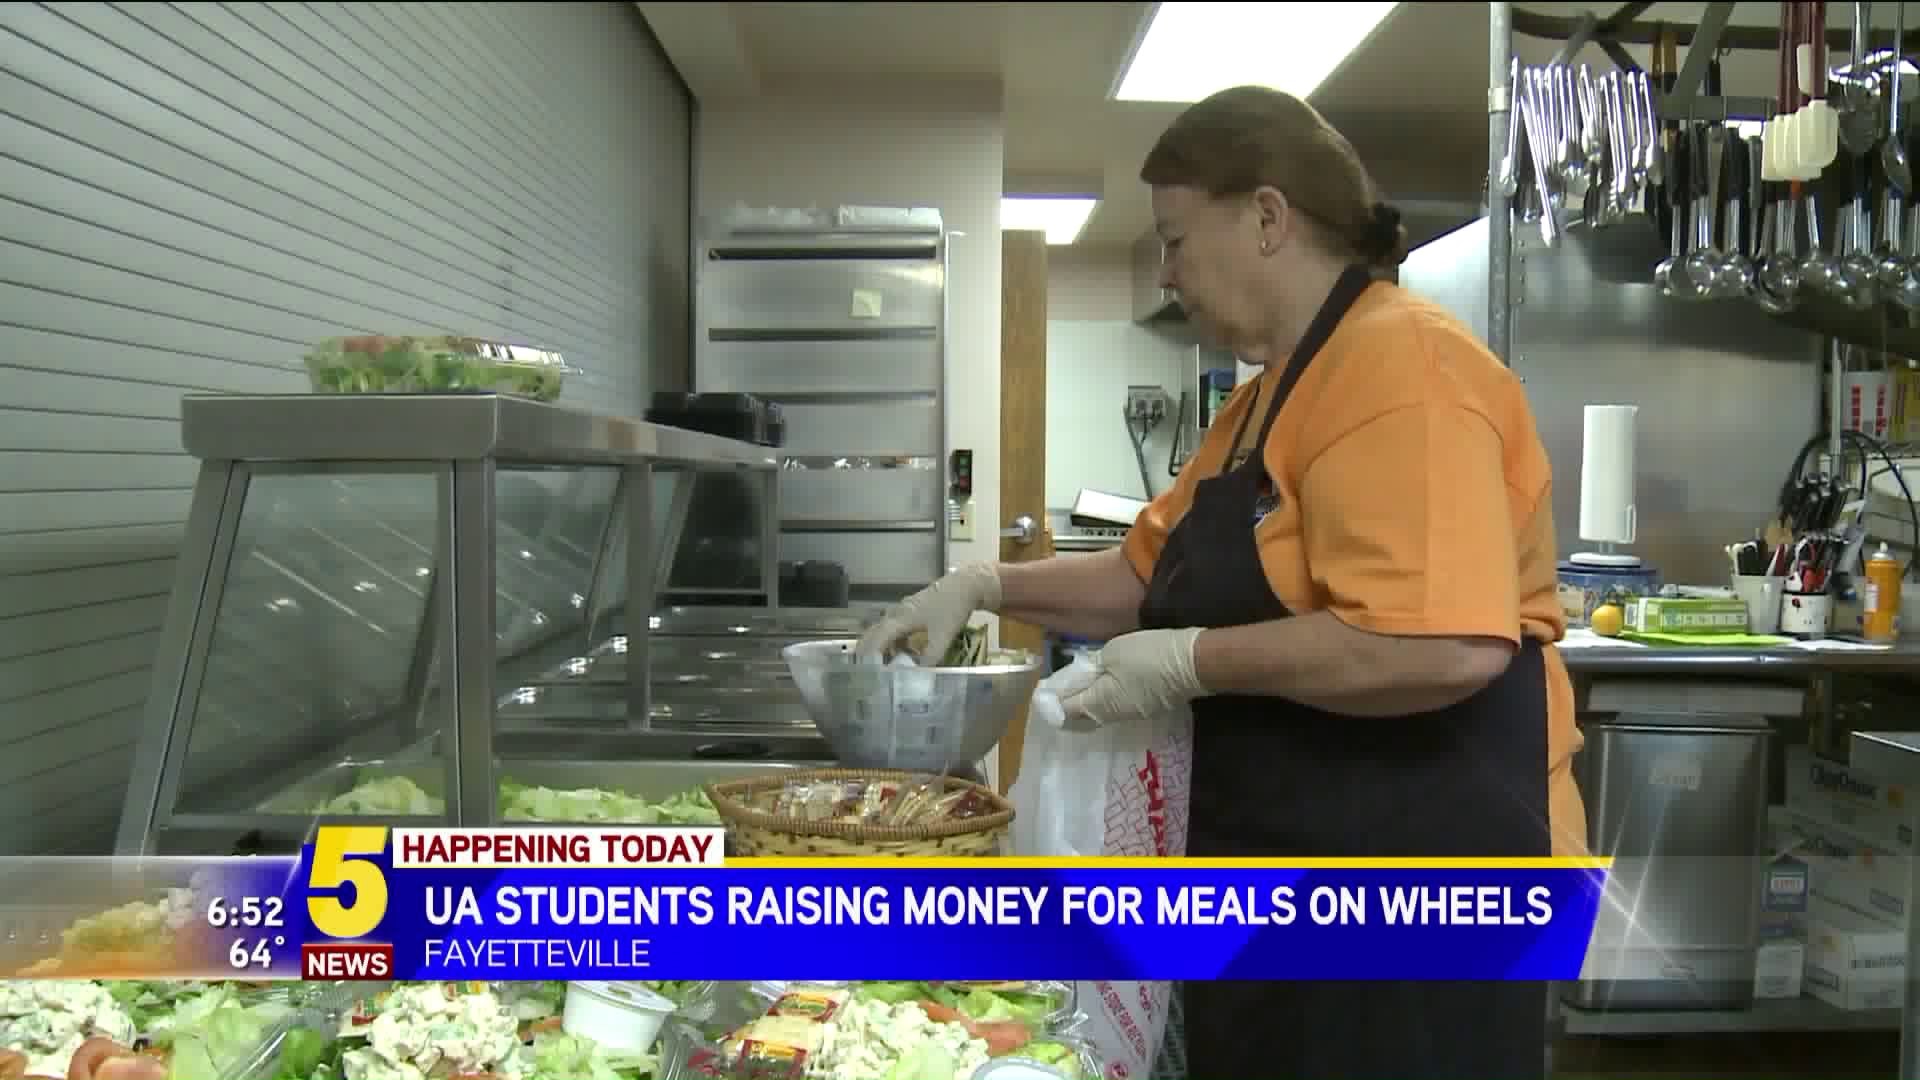 MEALS ON WHEELS FUNDRAISER